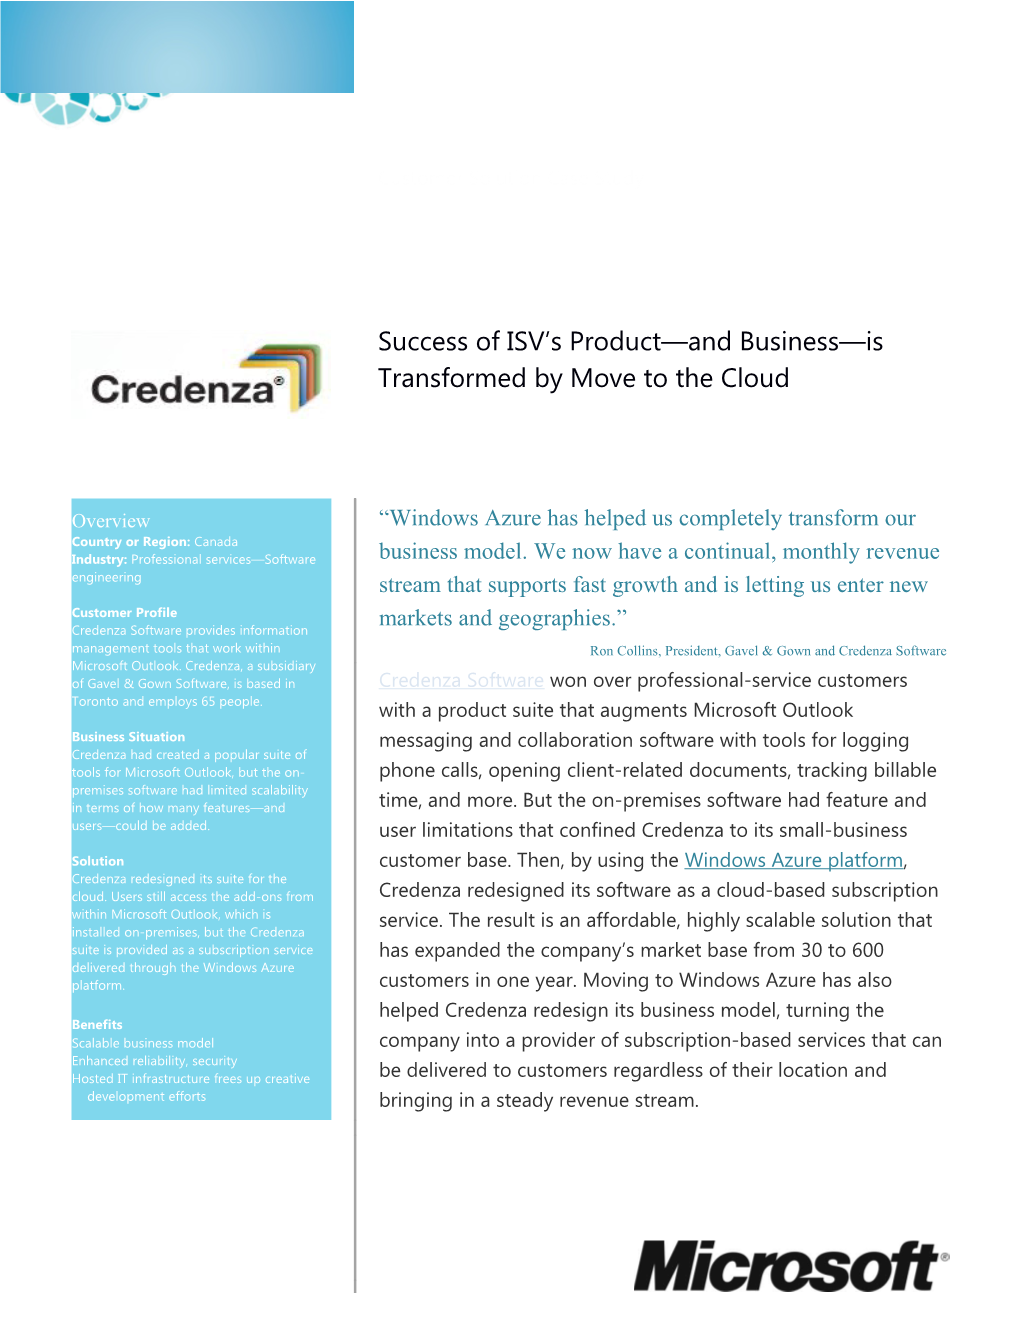 Success of ISV S Product and Business Is Transformed by Moving to the Cloud